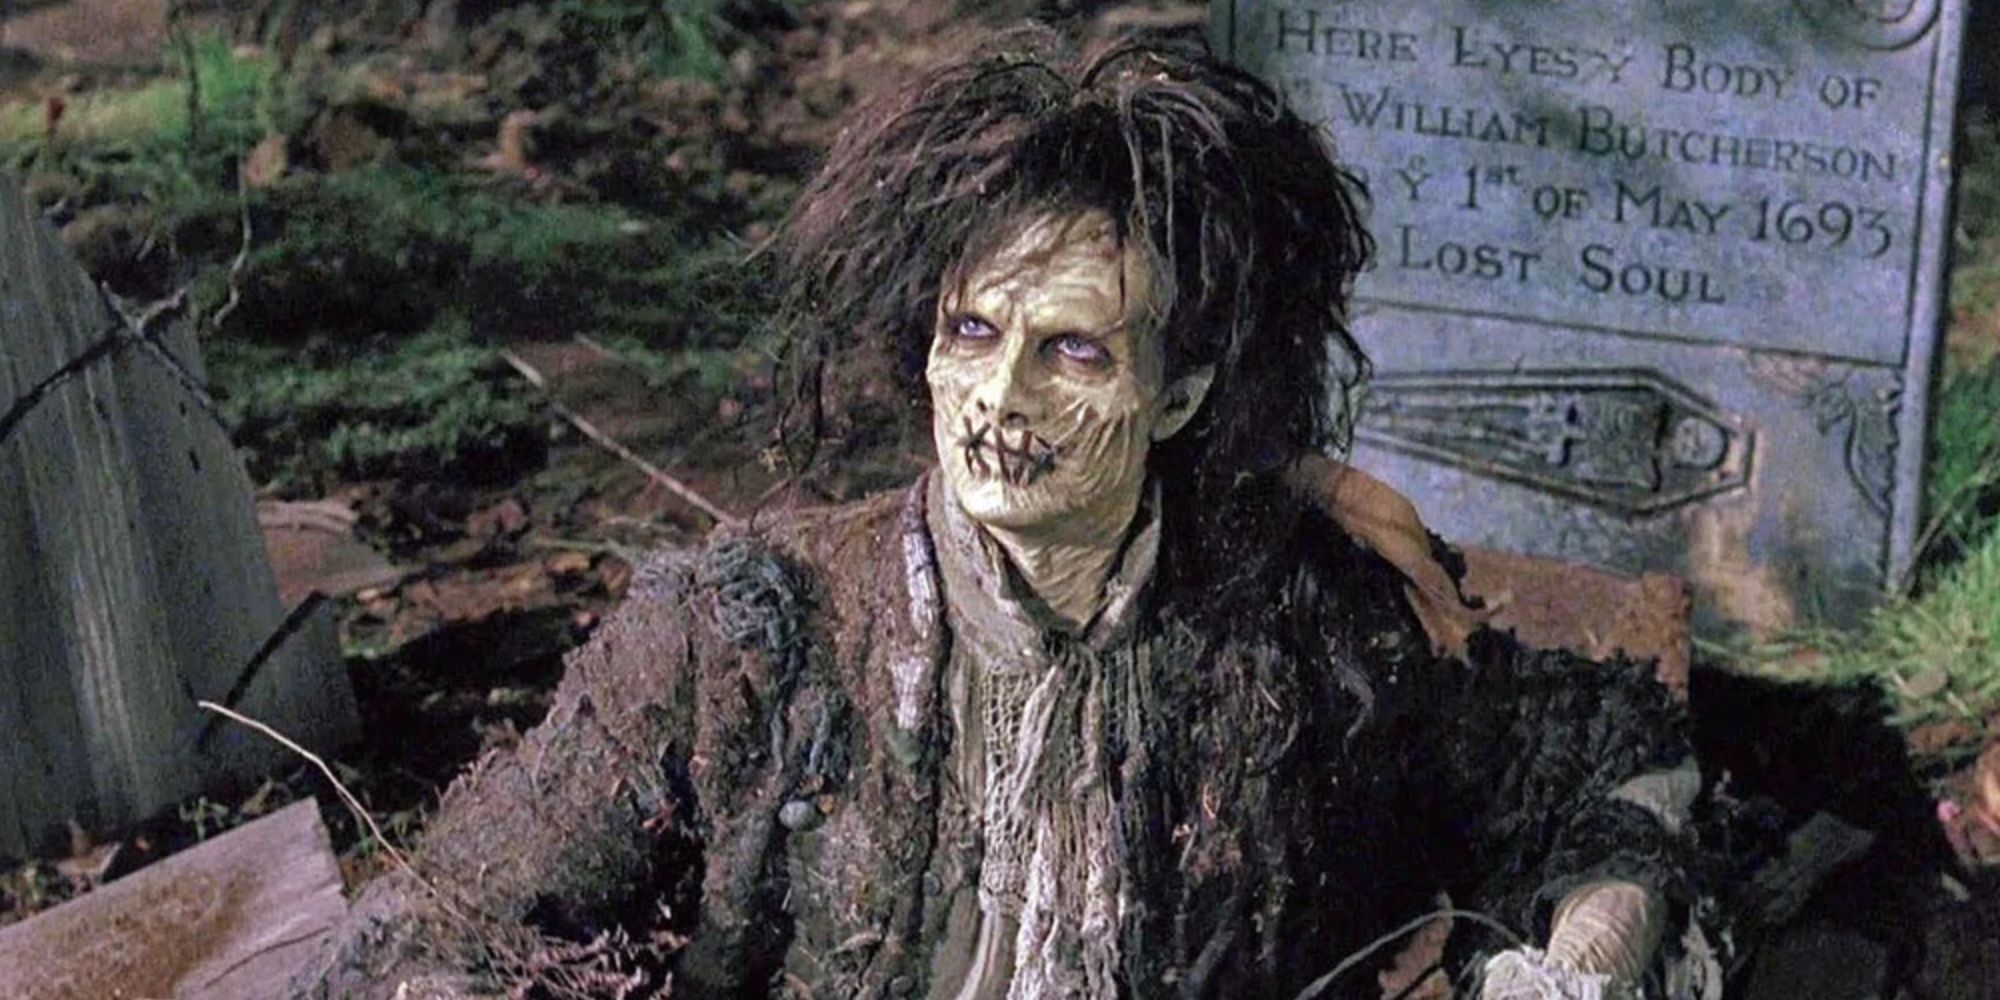 Billy Butcherson rises from the grave in Hocus Pocus